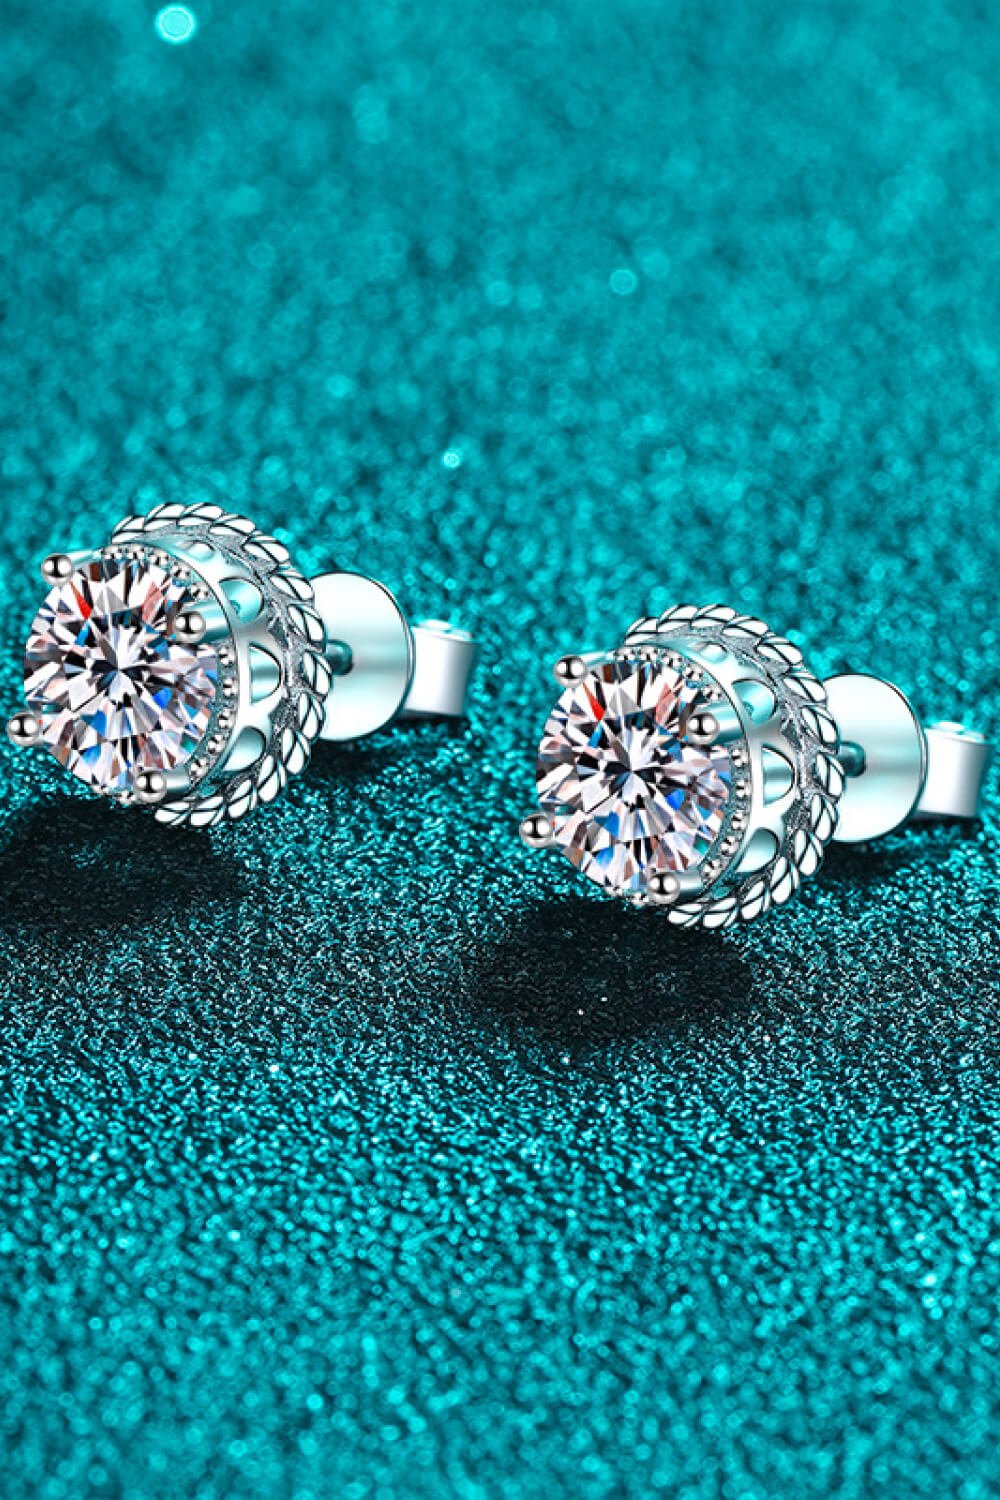 1 Carat Moissanite Rhodium-Plated Round Stud Earrings - Uylee's Boutique